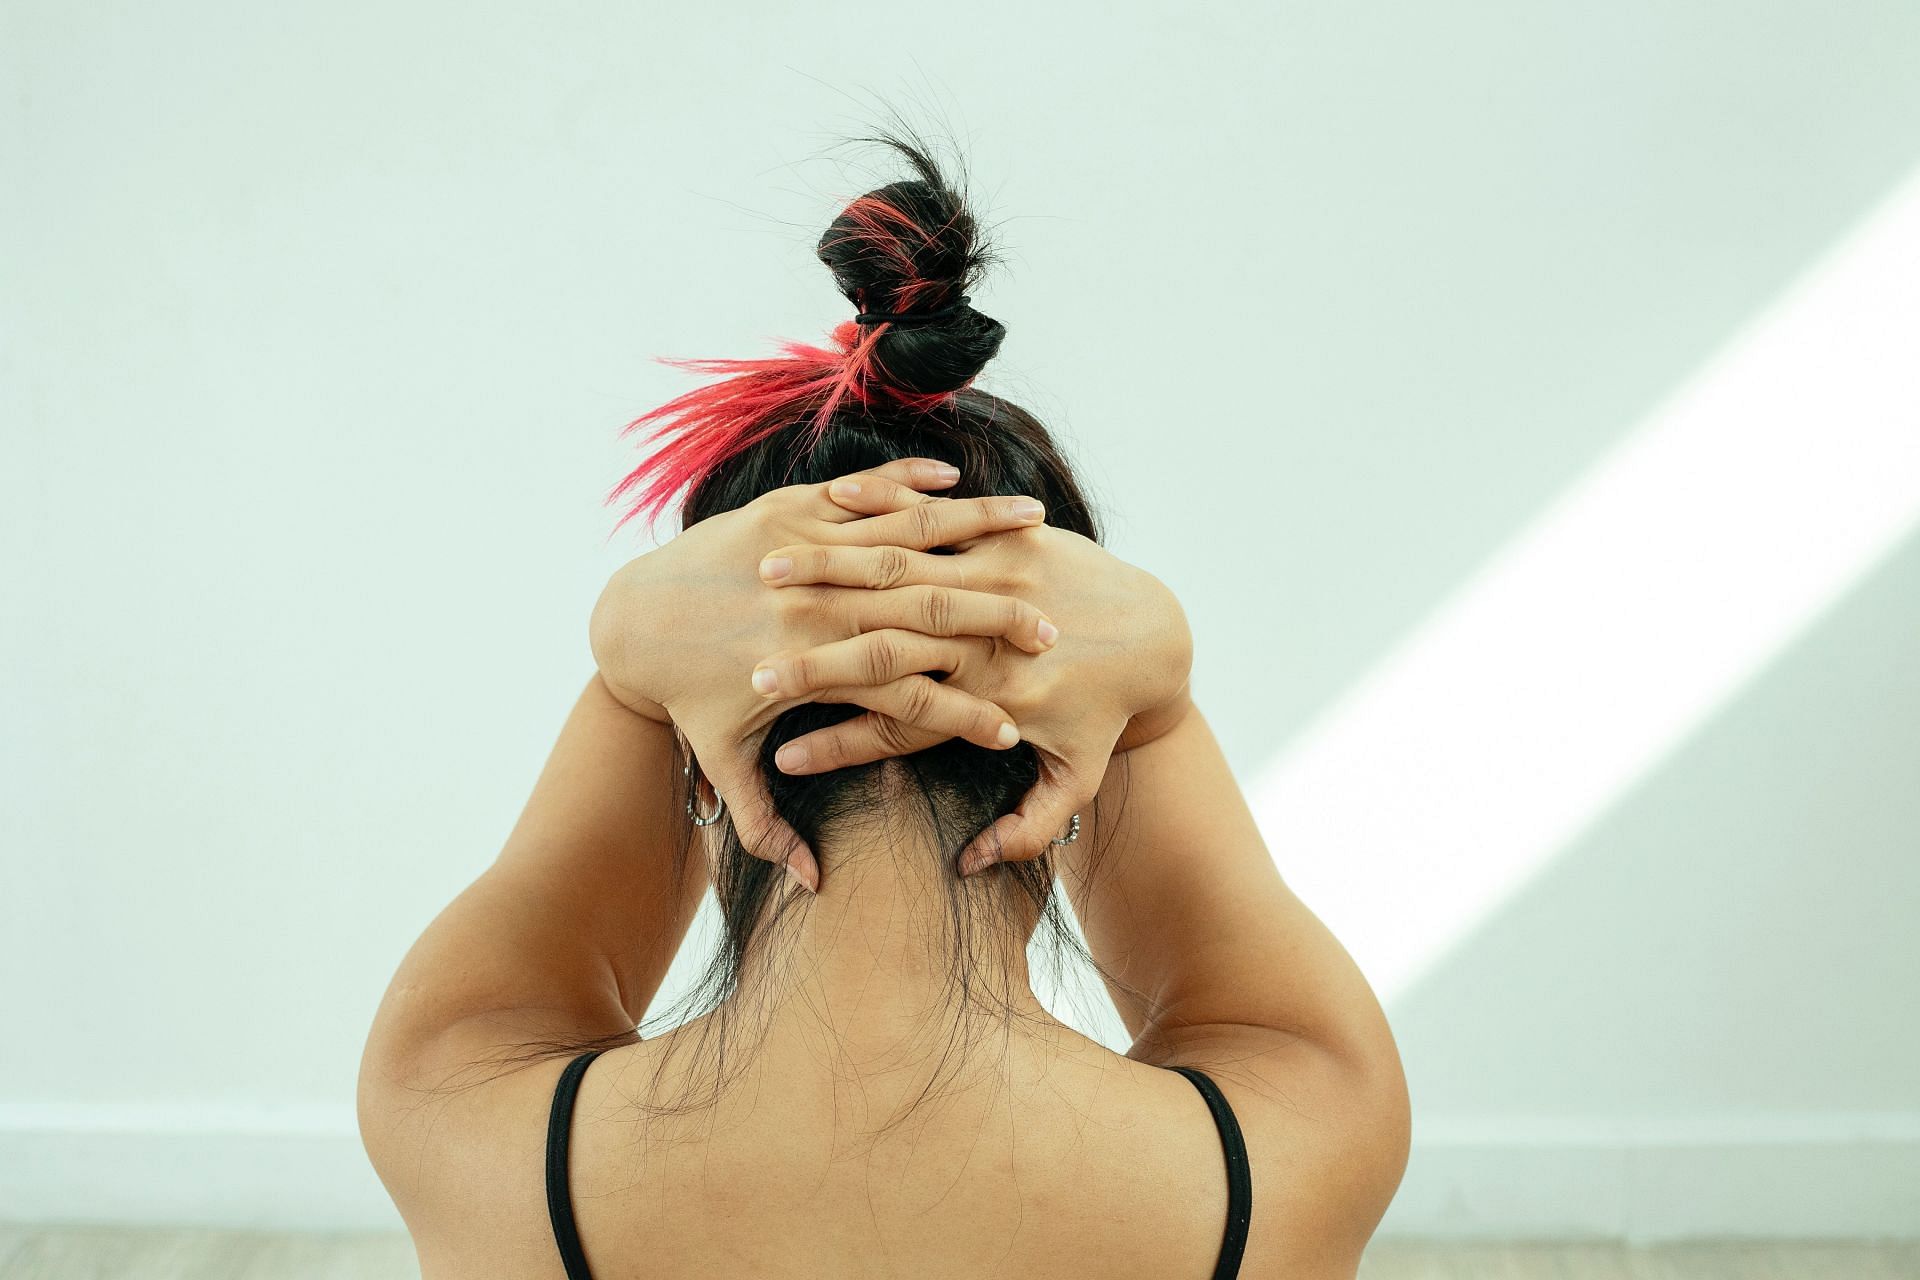 Neck stretches can help you tone and reduce your neck fat (Image via Pexels/Miriam Alonso)